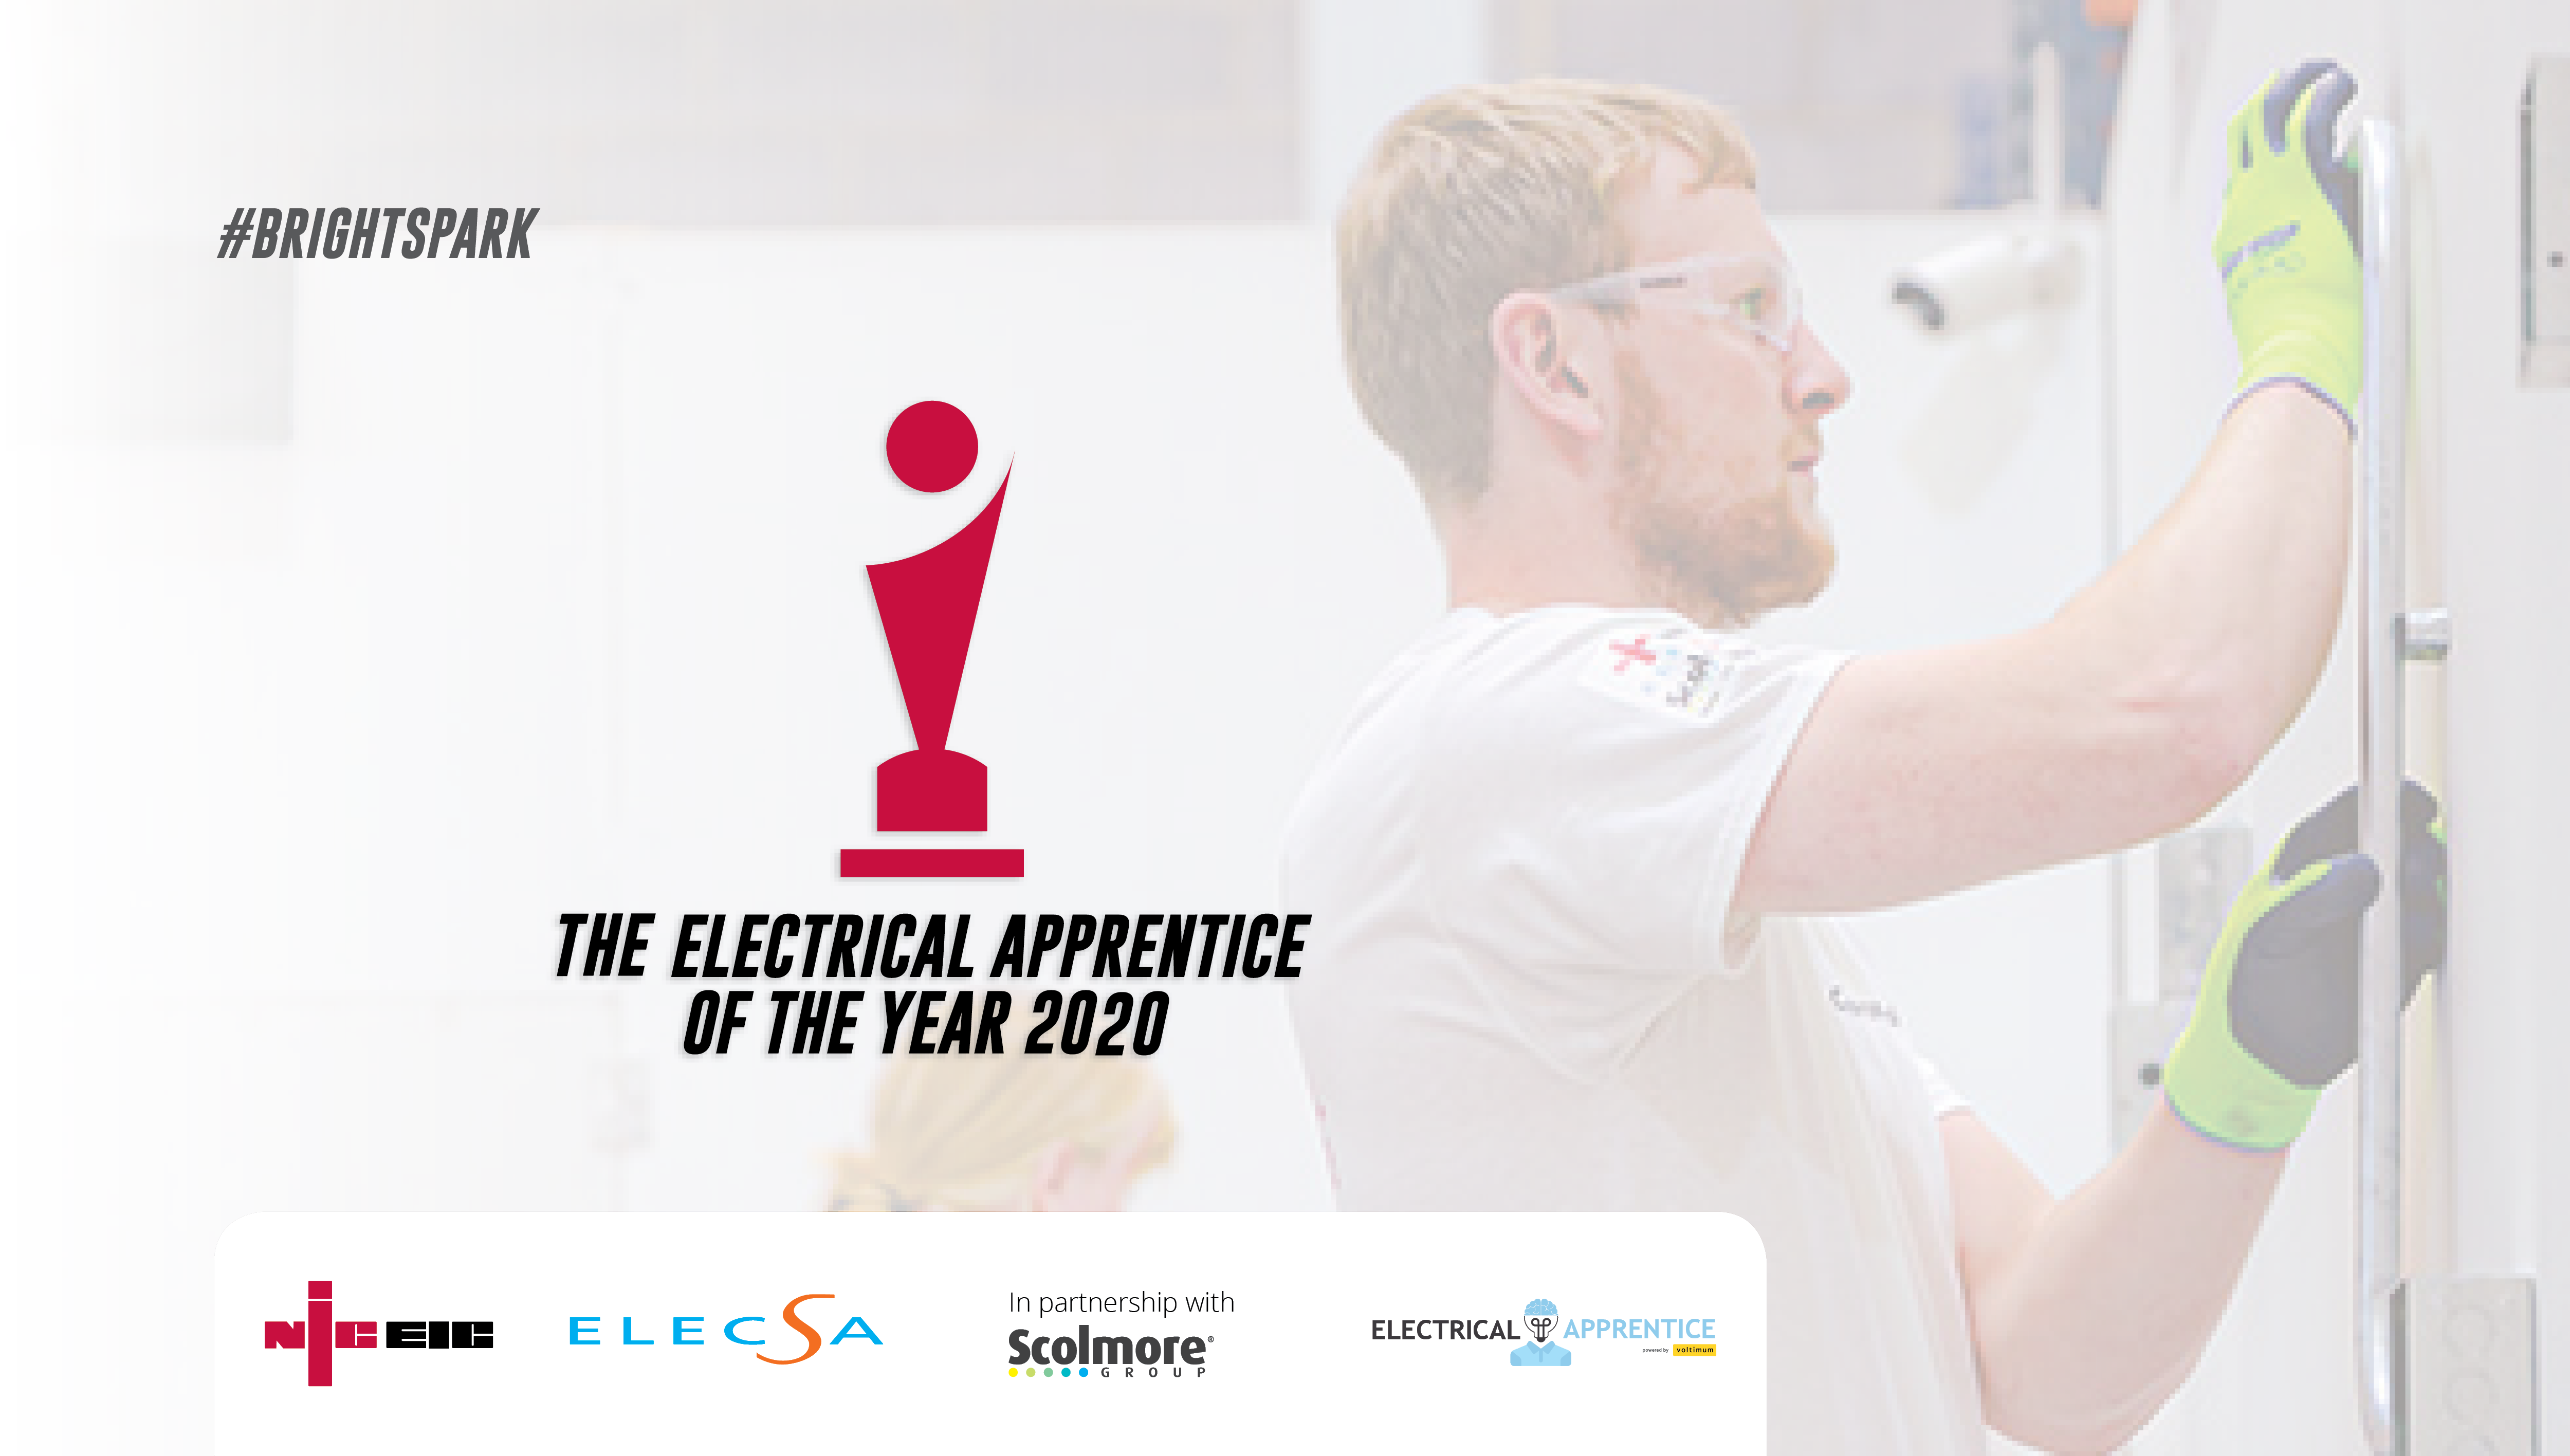 The Electrical Apprentice of the Year competition moves to next stage